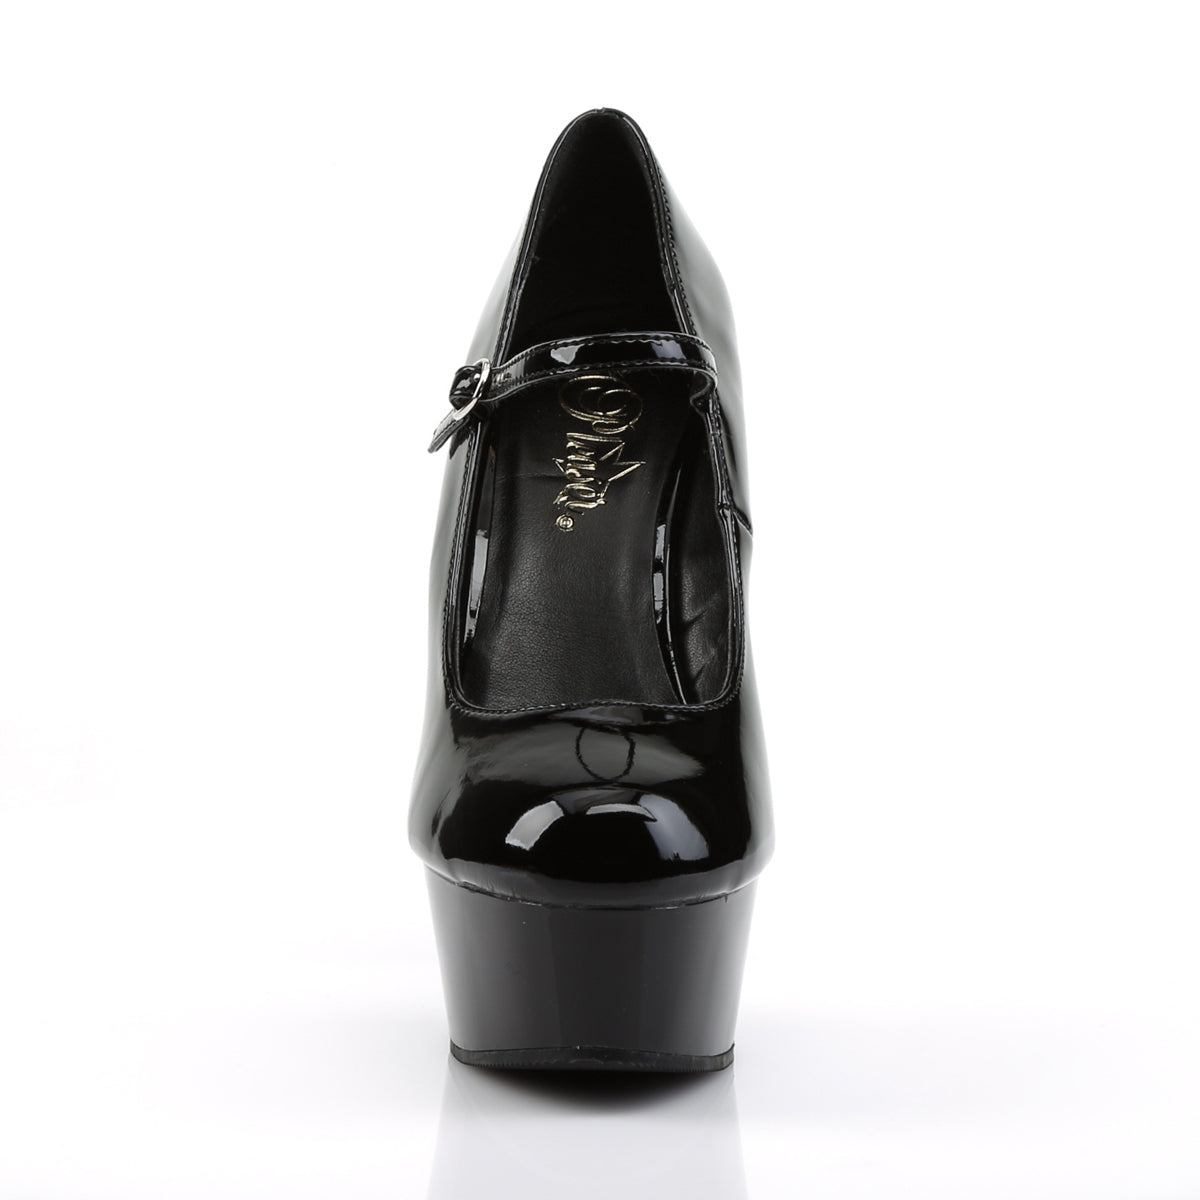 DELIGHT-687 Black Patent Mary Janes Pleaser